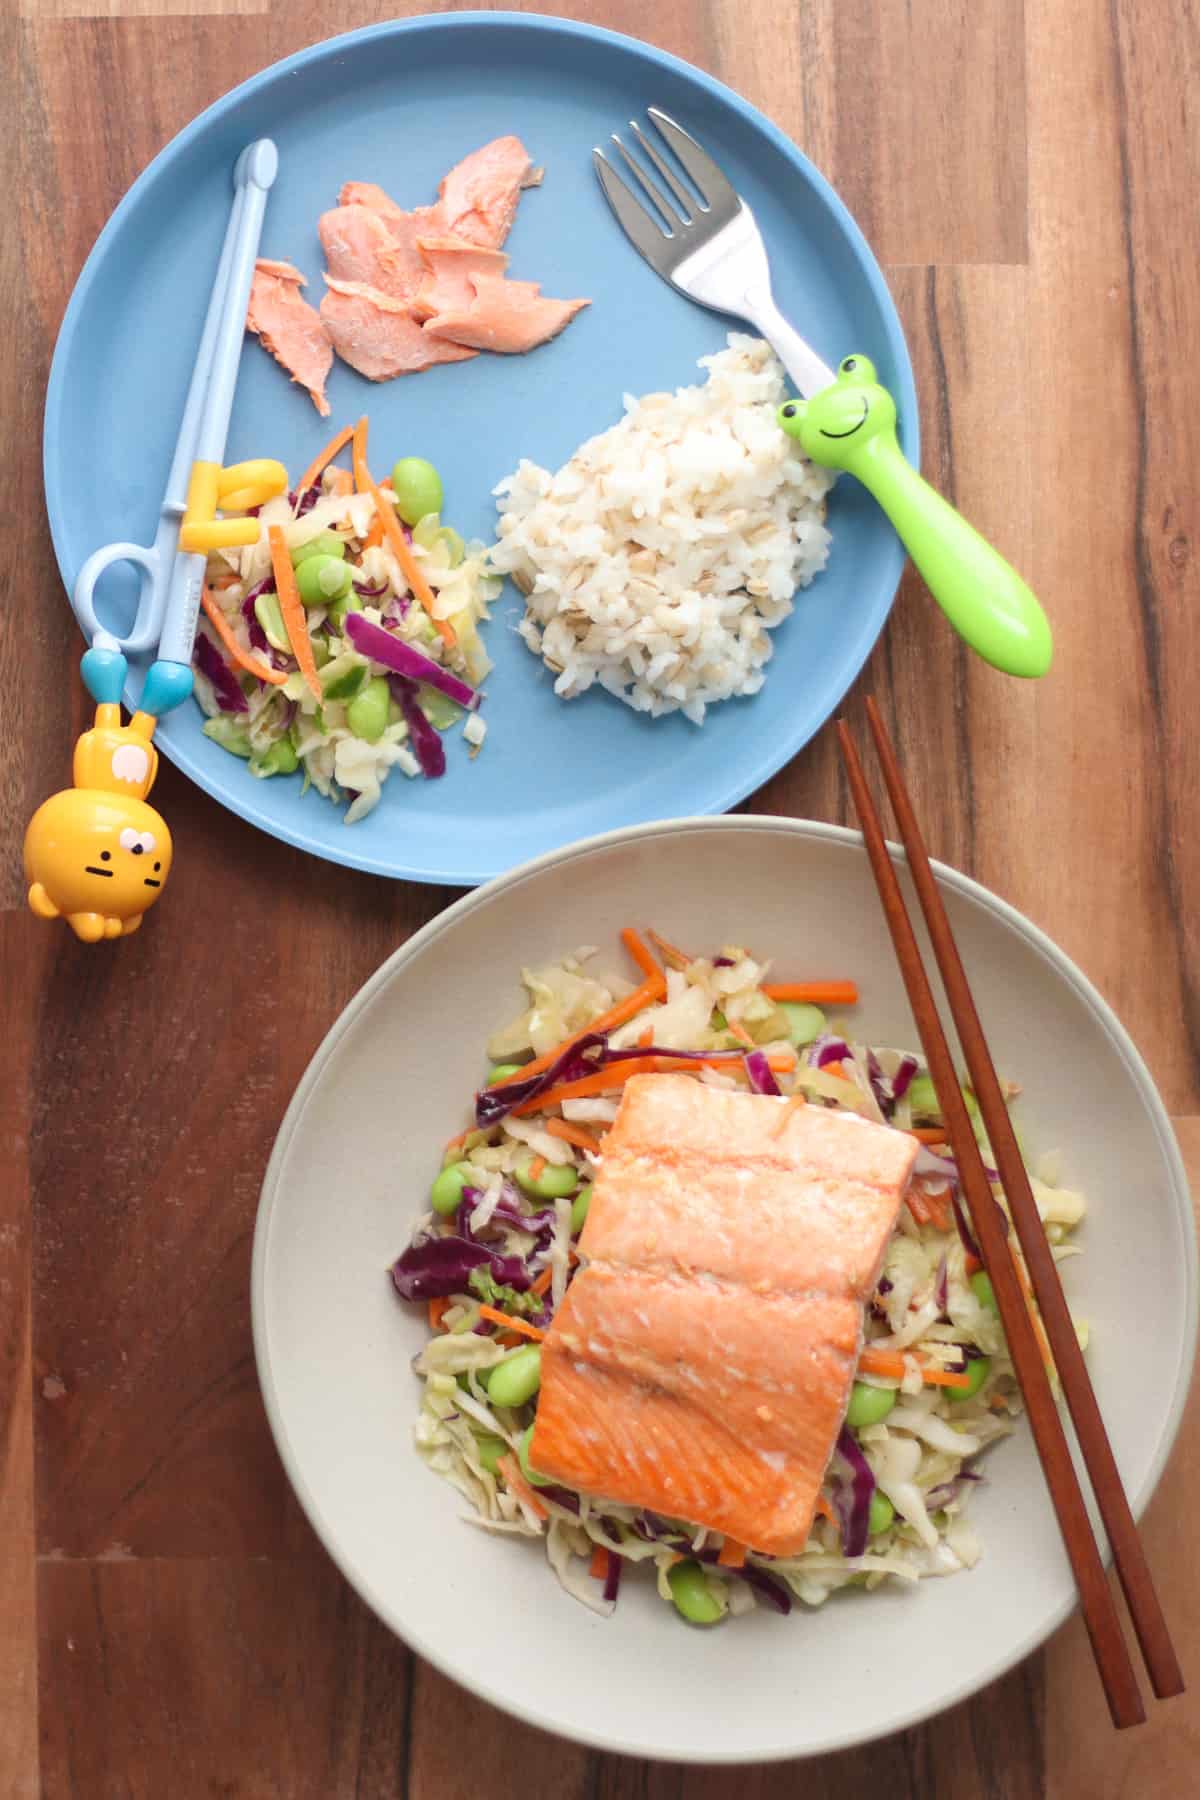 Cabbage salad with a whole salmon fillet for adult's plate and toddler's plate with rice, salad, and salmon pieces.